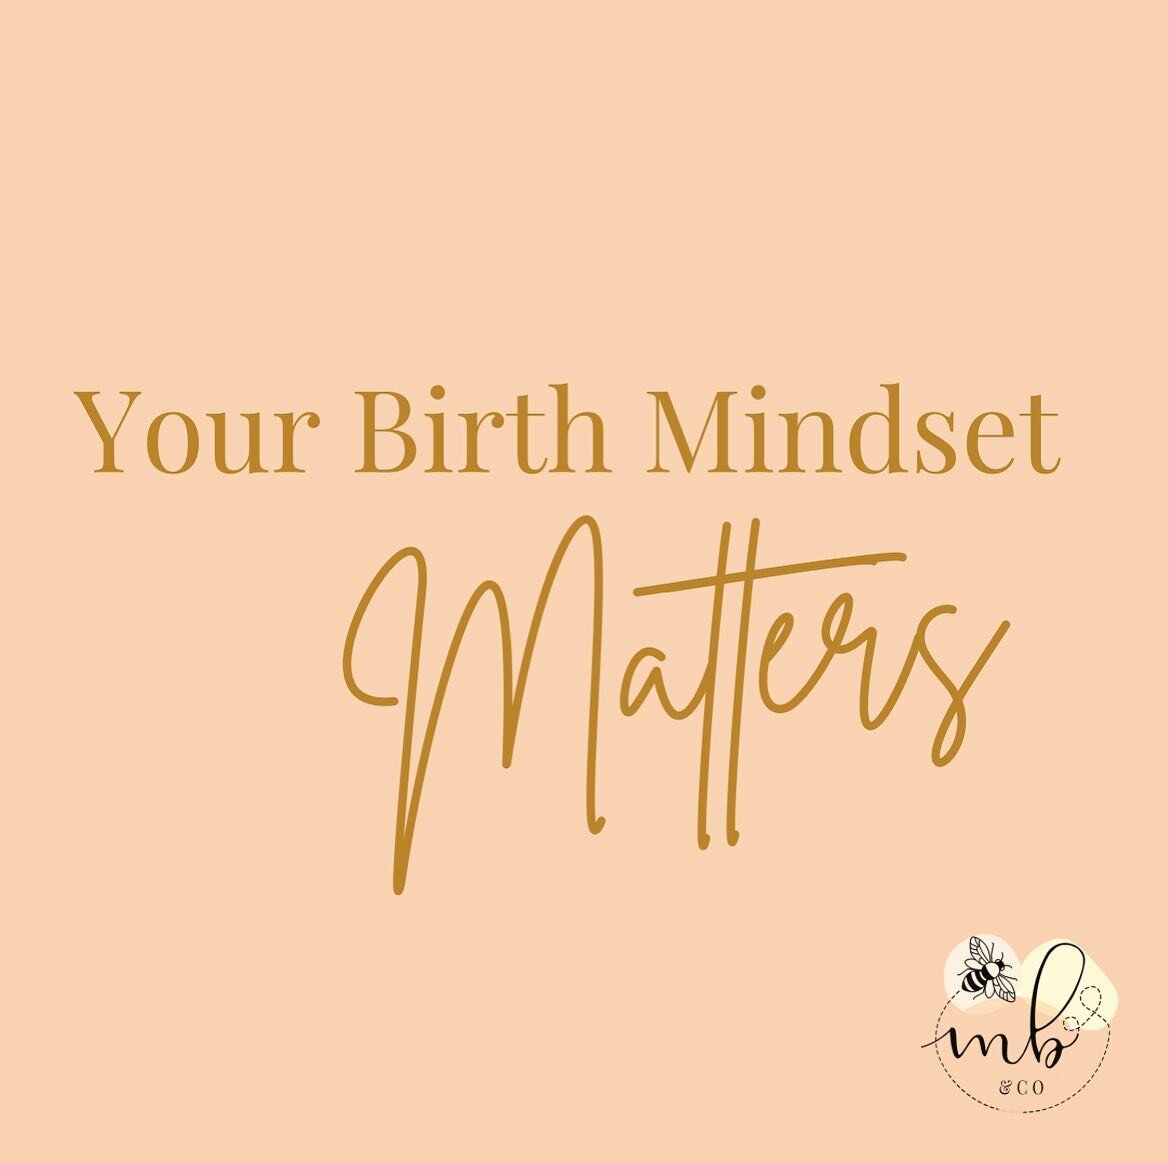 YOUR BIRTH MINDSET MATTERS
.
You&rsquo;ve probably prepared yourself for the physiological aspects of birth but have you also prepared your mind?
.
As a society we tend to emphasize how important it is to prepare your home and lifestyle for your new 